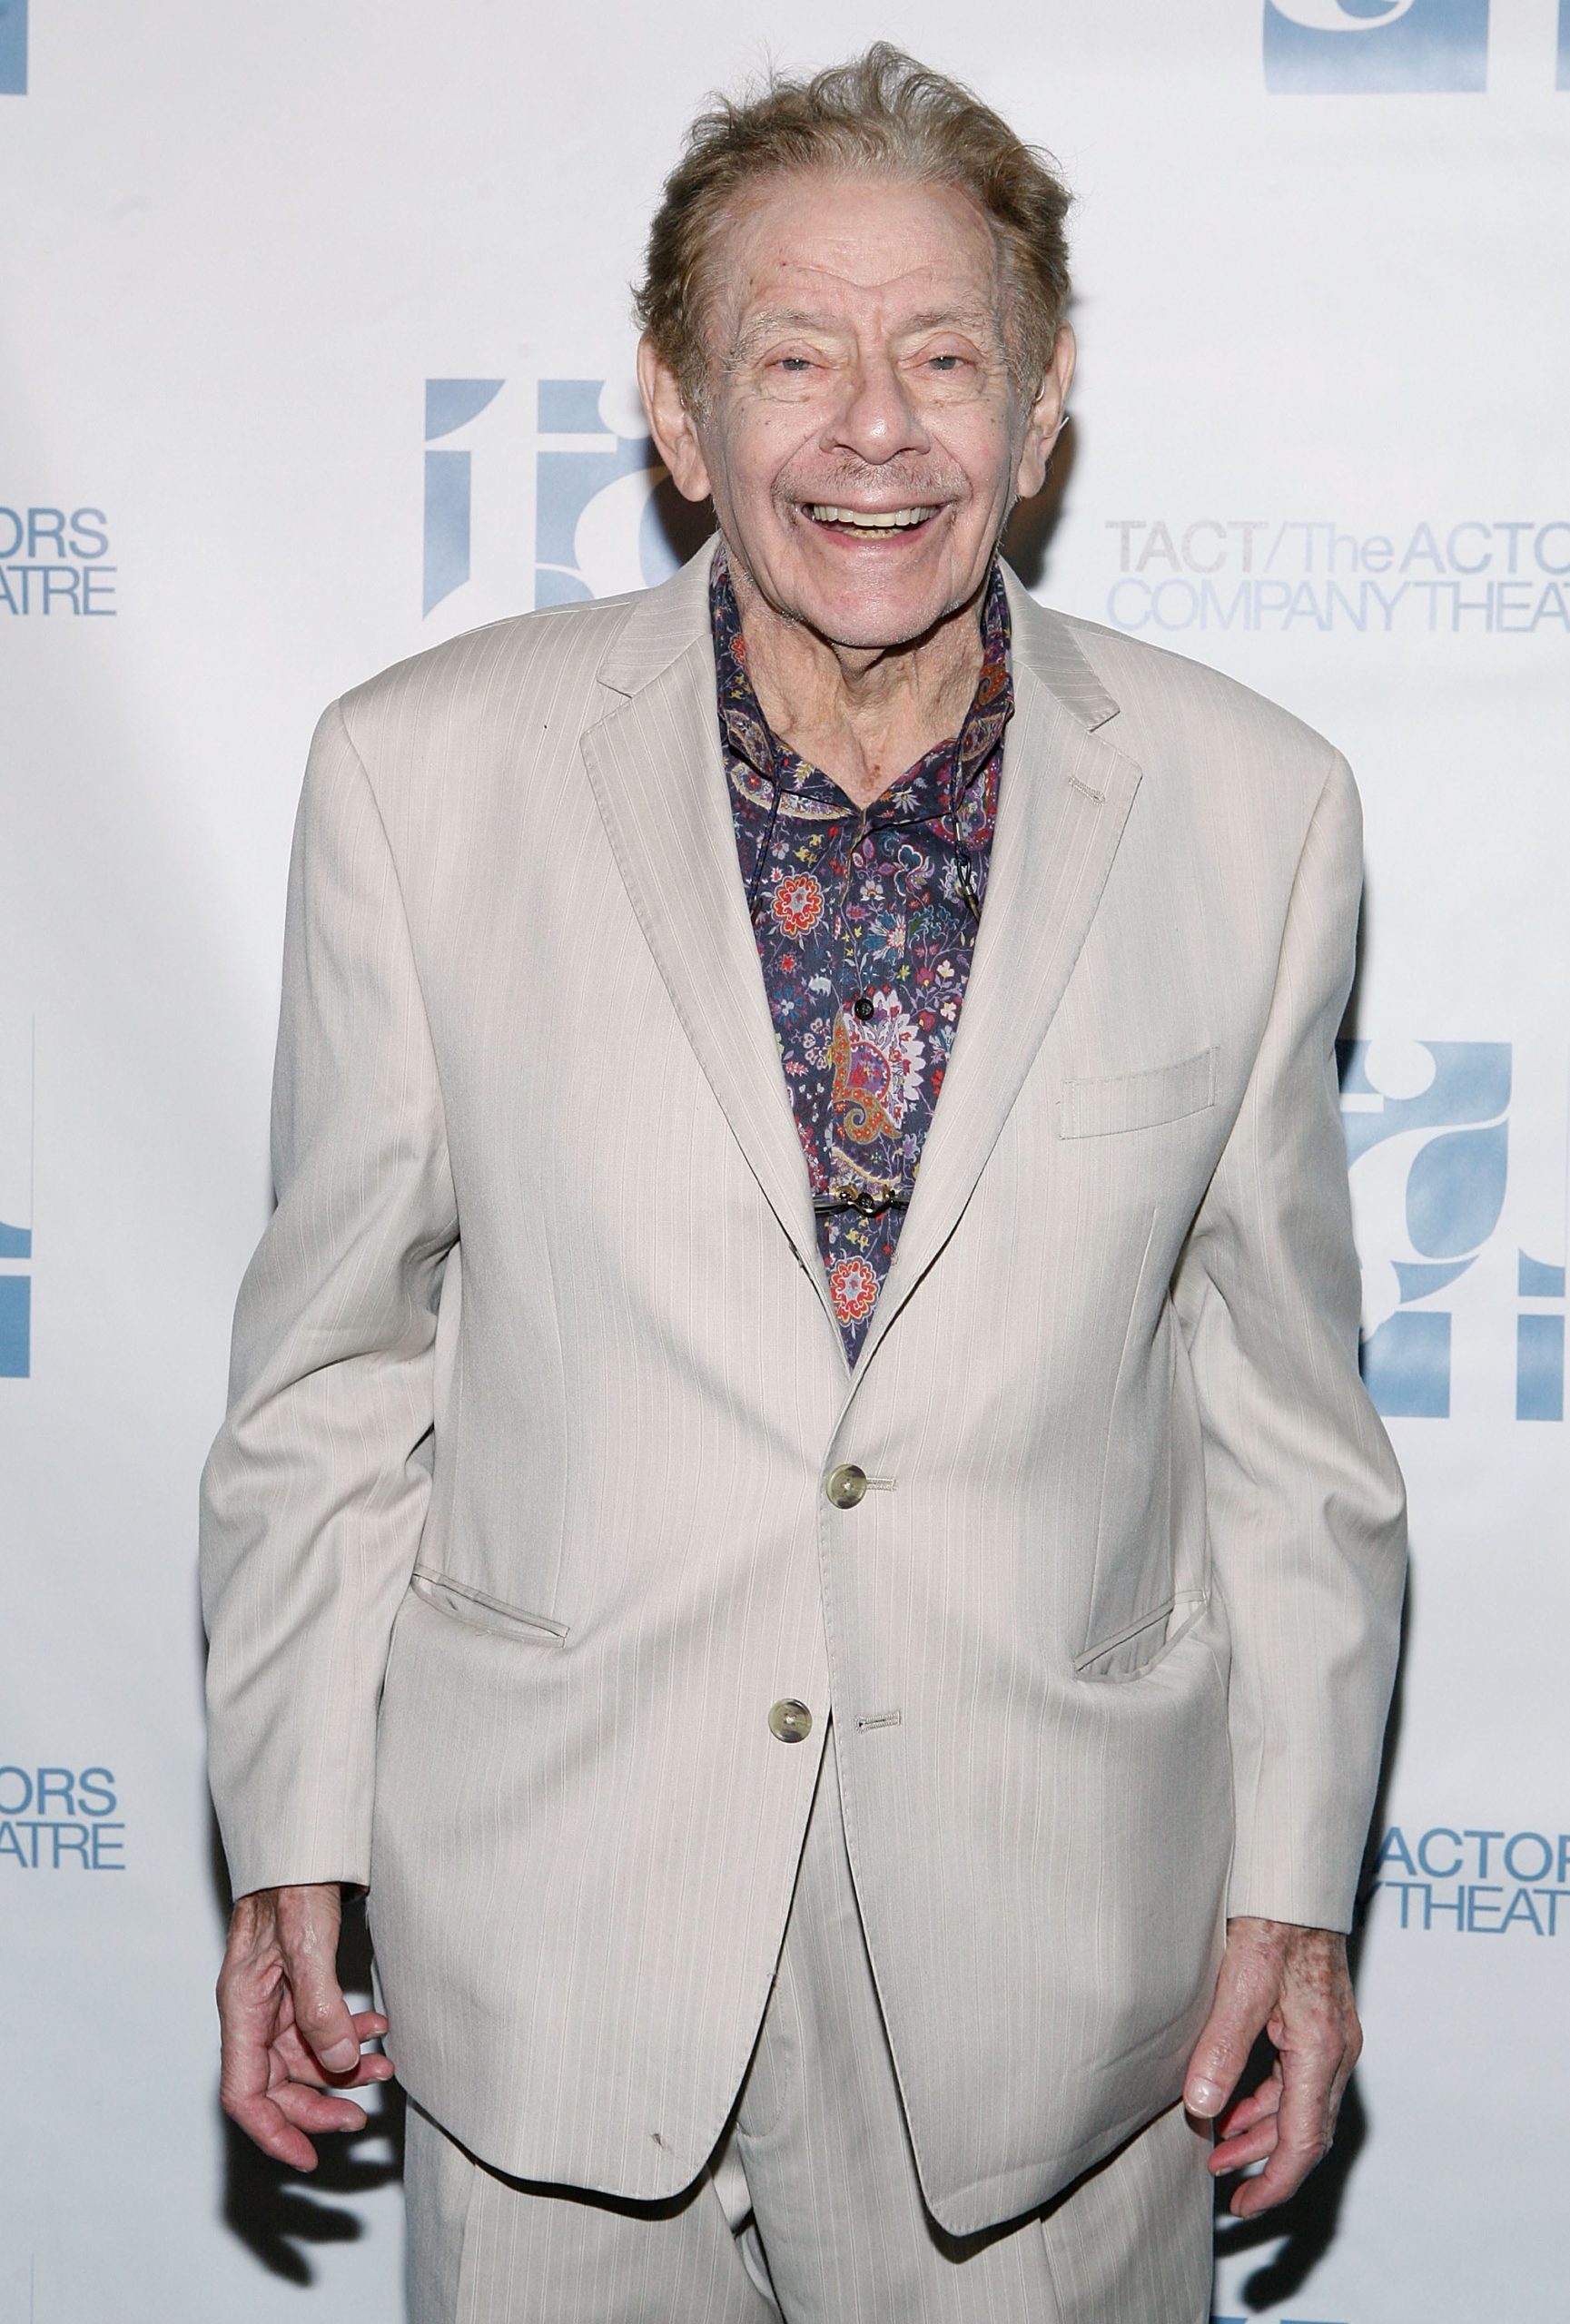 NEW YORK, NY - MAY 09:  Jerry Stiller attends the TACT/The Actors Company Theatre Spring Gala at The Edison Ballroom on May 9, 2011 in New York, United States.  (Photo by John Lamparski/Getty Images)